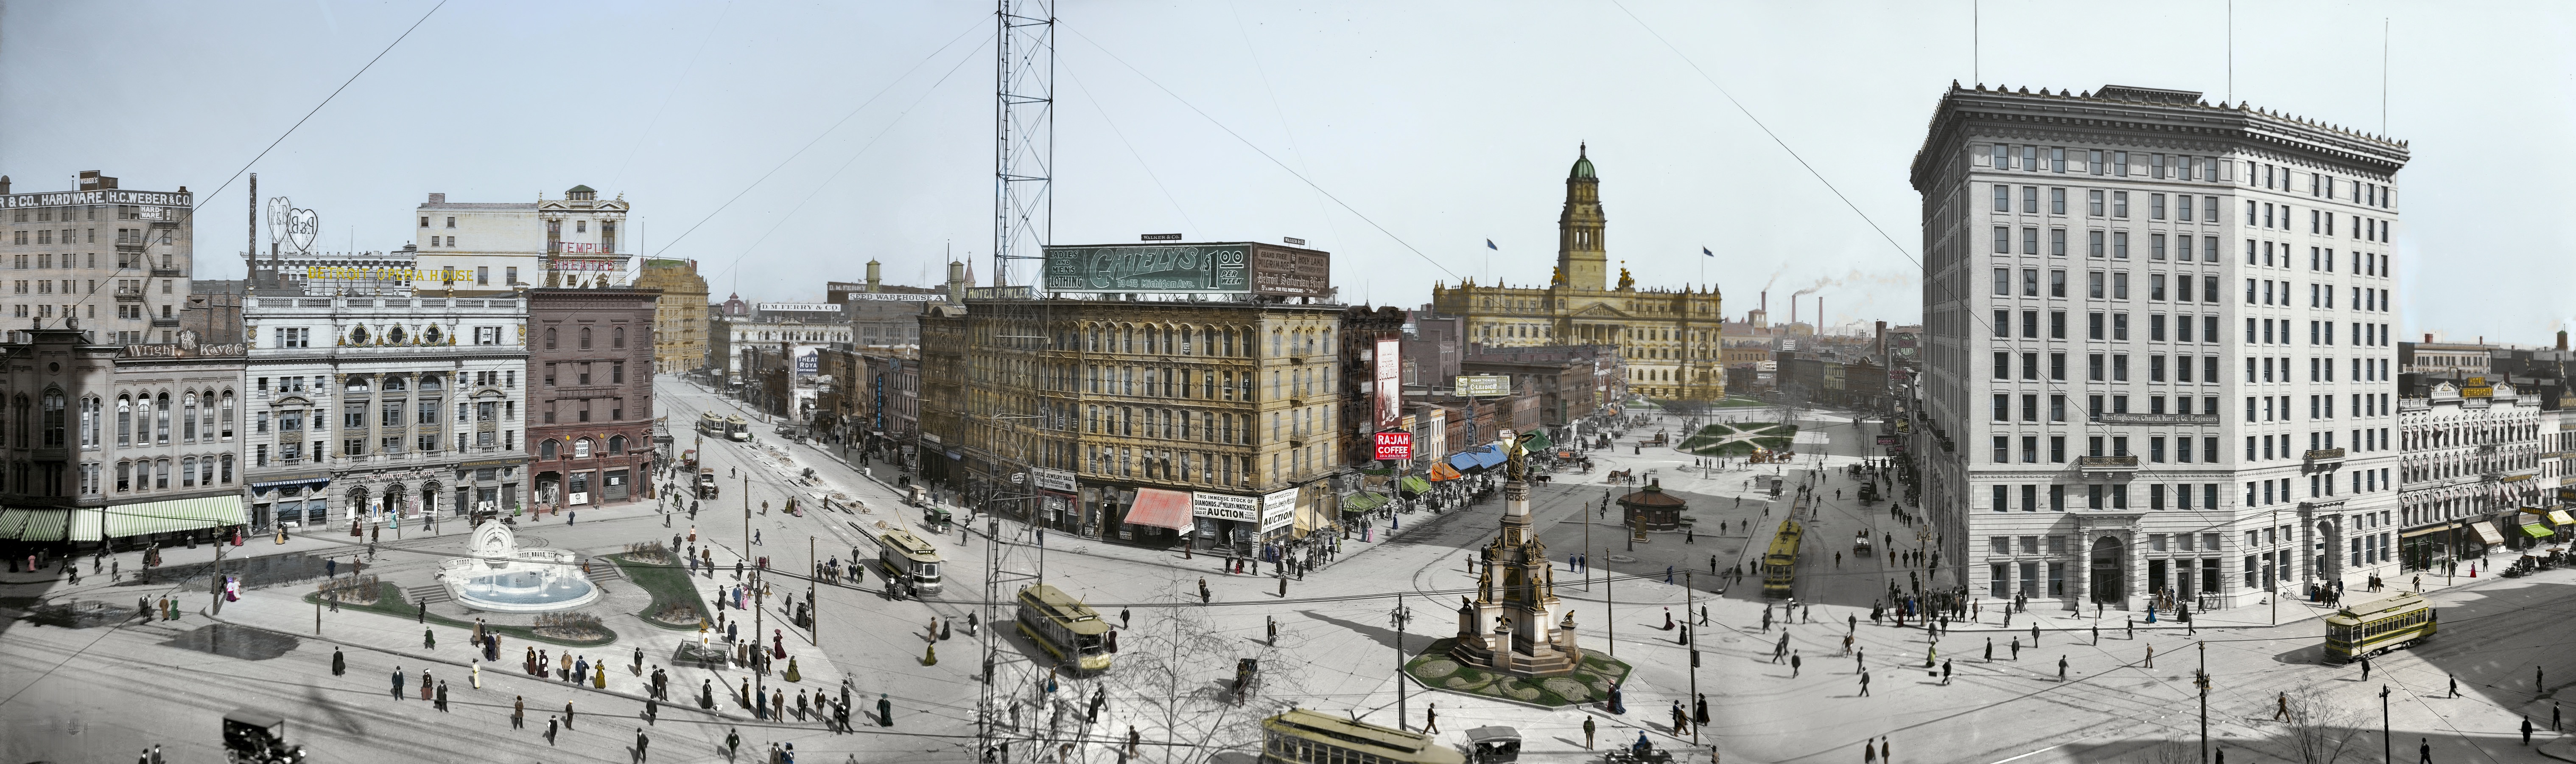 Downtown Detroit circa 1907. Black and white image made up of three 8x10 glass negatives was originally posted by Dave on Shorpy website 2/4/2012. View full size.